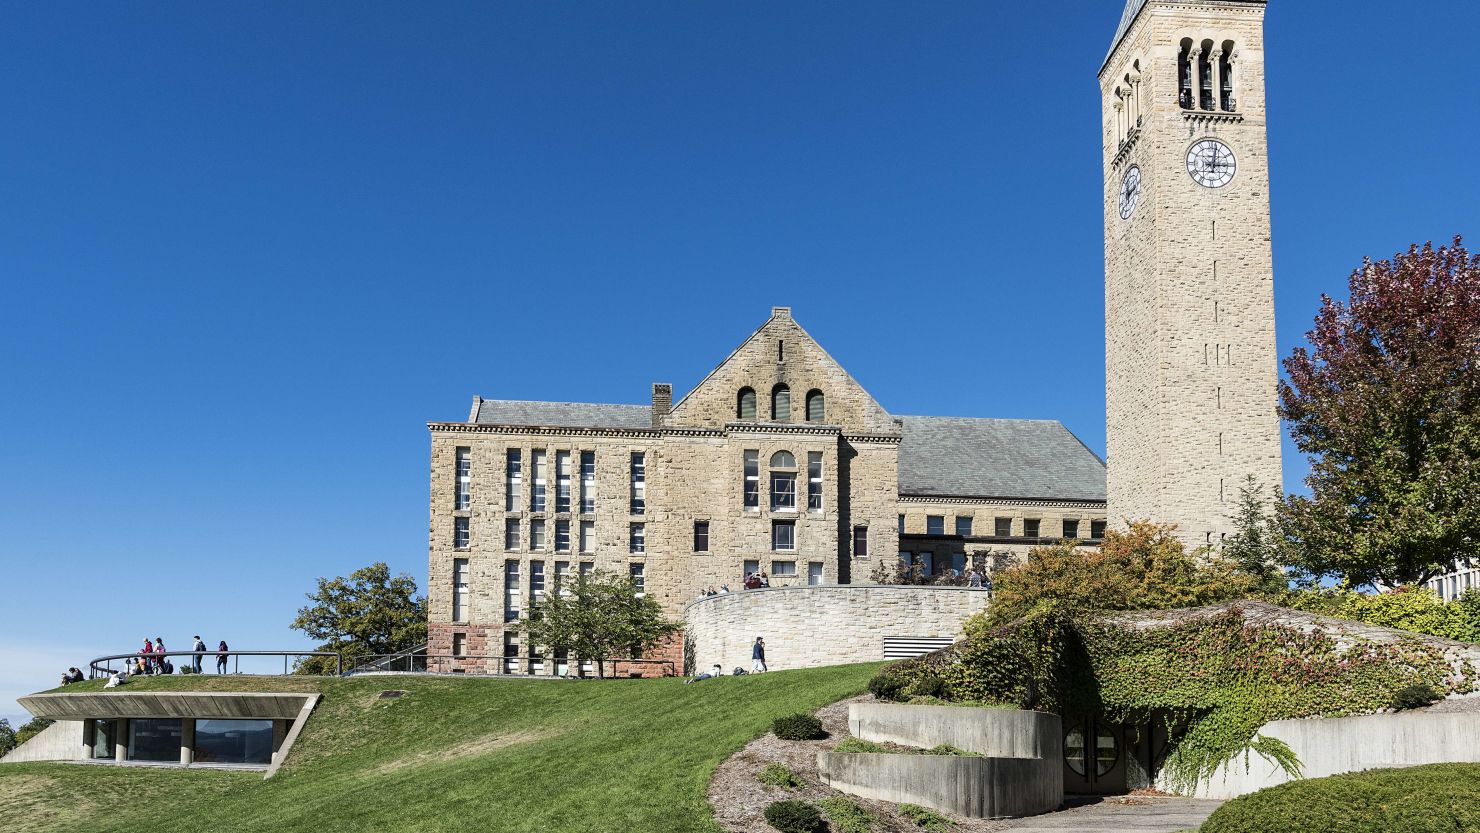 Library and McGraw bell tower on the Cornell University campus.